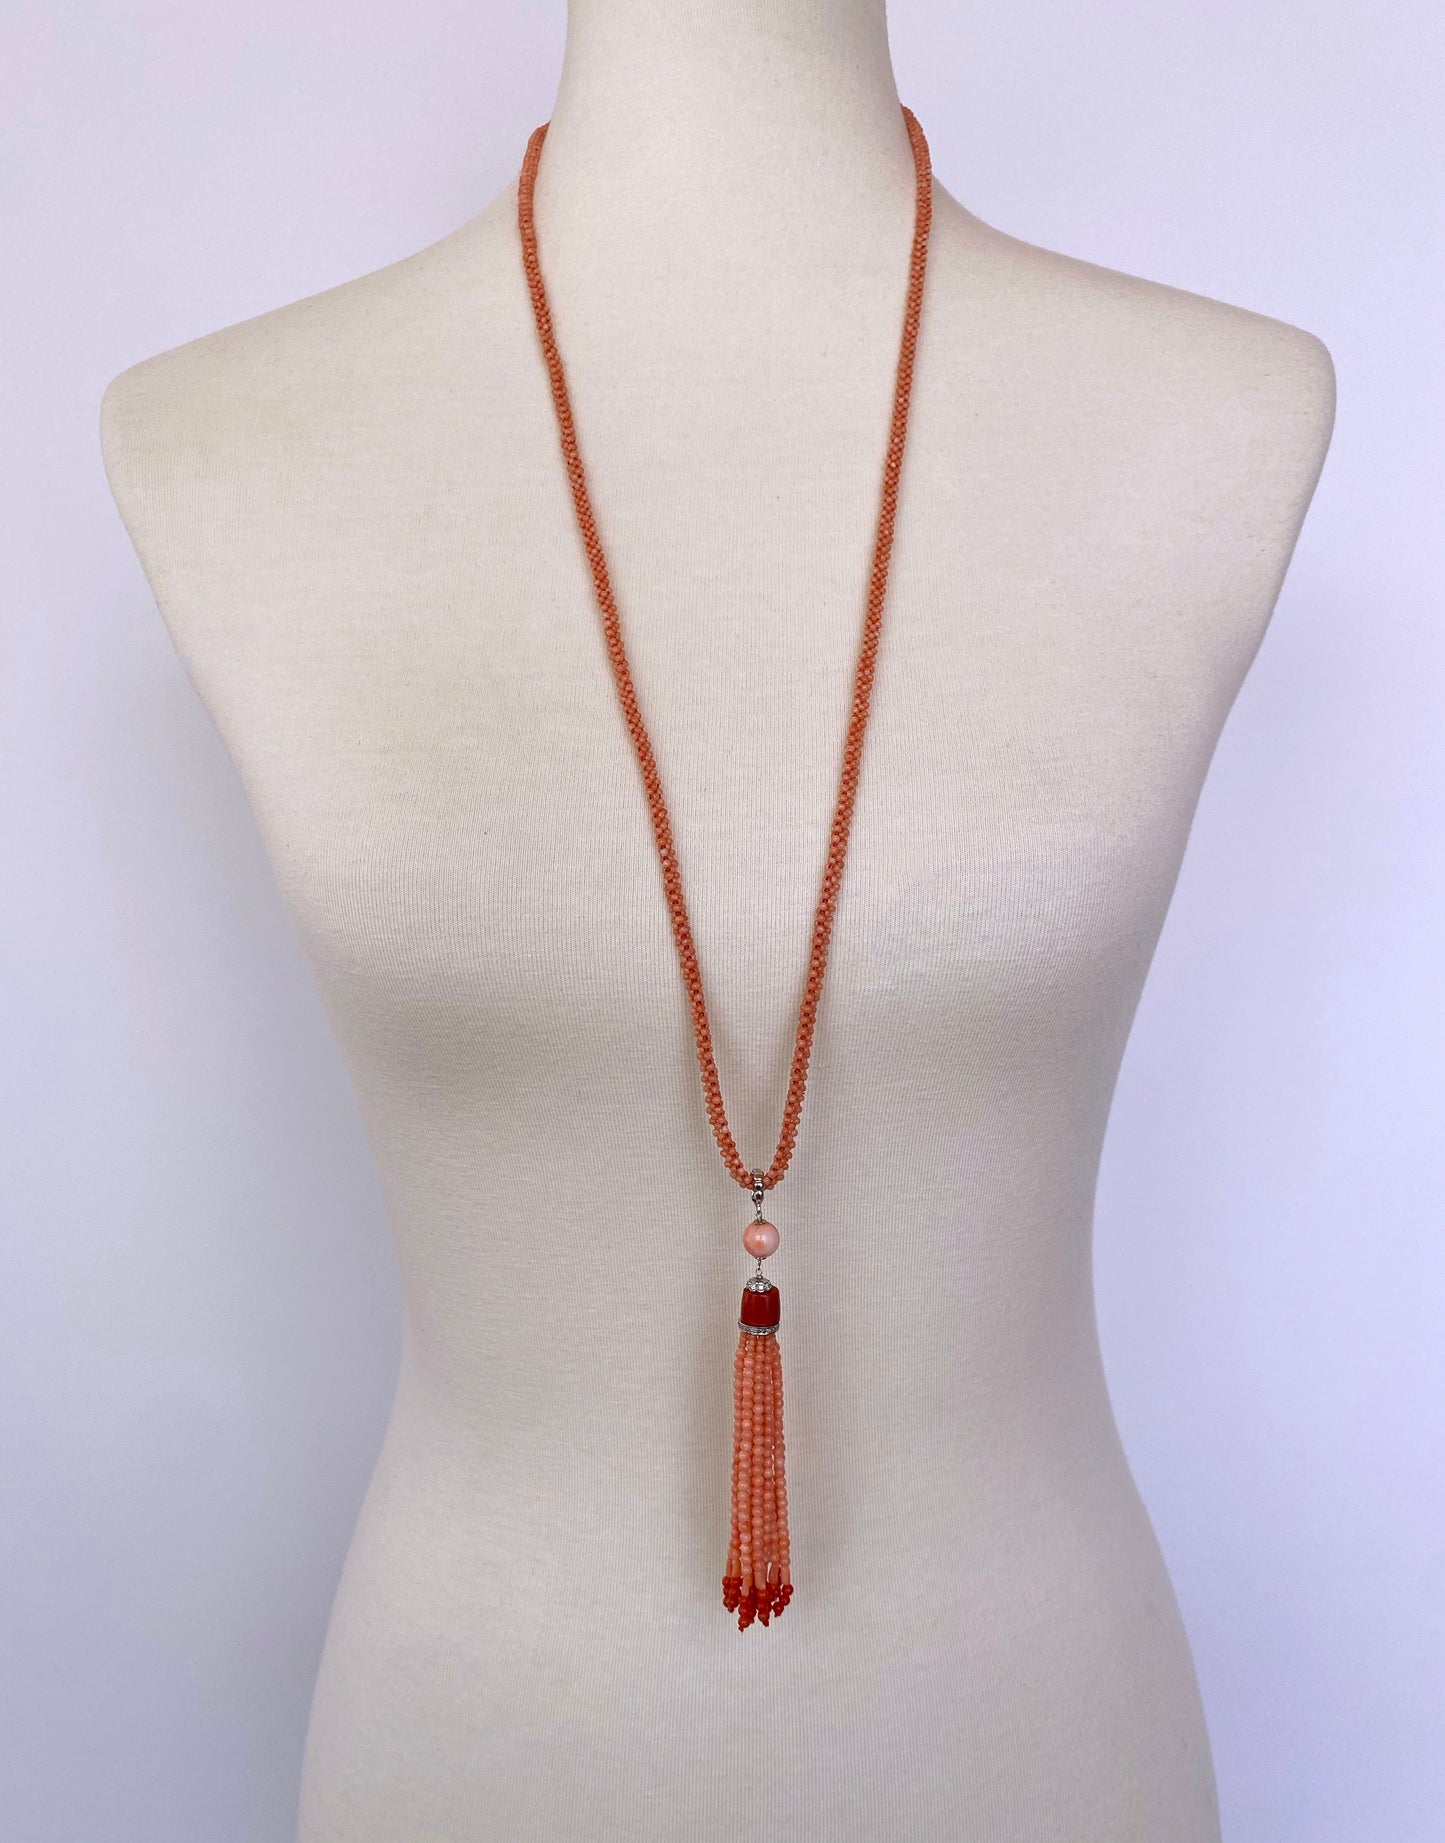 Marian J. Woven Mediterranean Coral Rope Necklace with 14K White Gold and Tassel